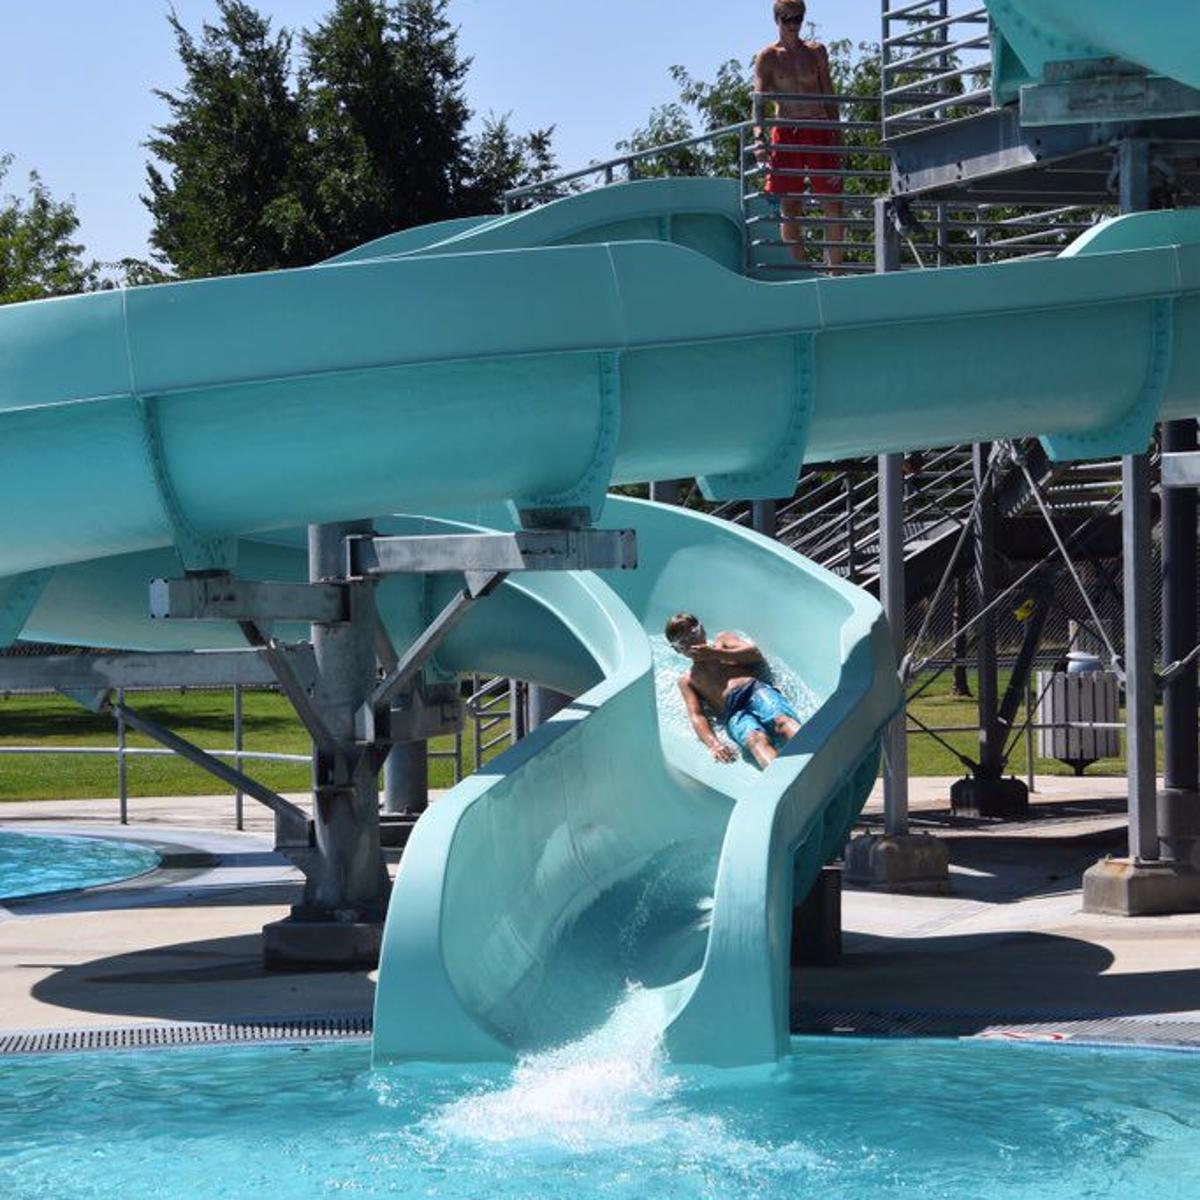 Covid 19 Updates Nampa Parks And Recreation To Open Park